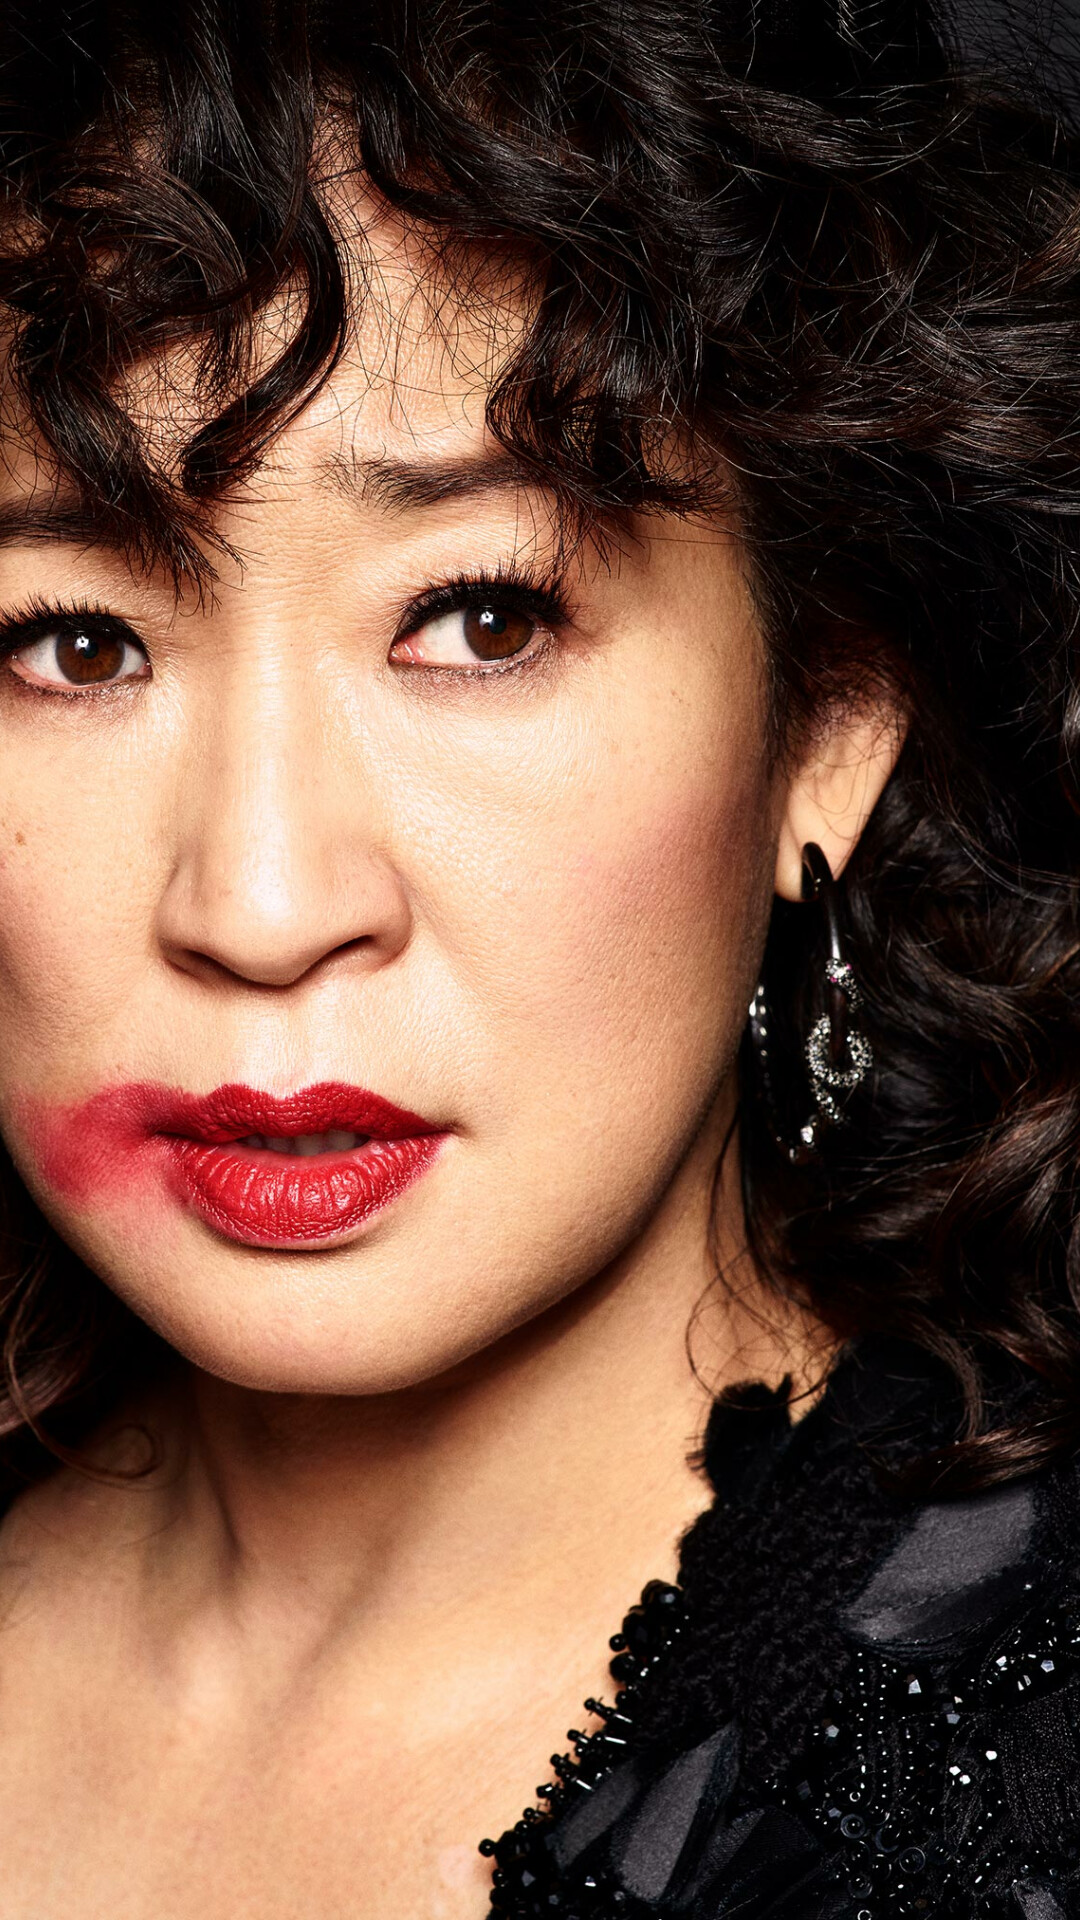 Killing Eve: Sandra Oh as an analyst with MI5 who becomes tirelessly preoccupied with a notorious assassin. 1080x1920 Full HD Background.